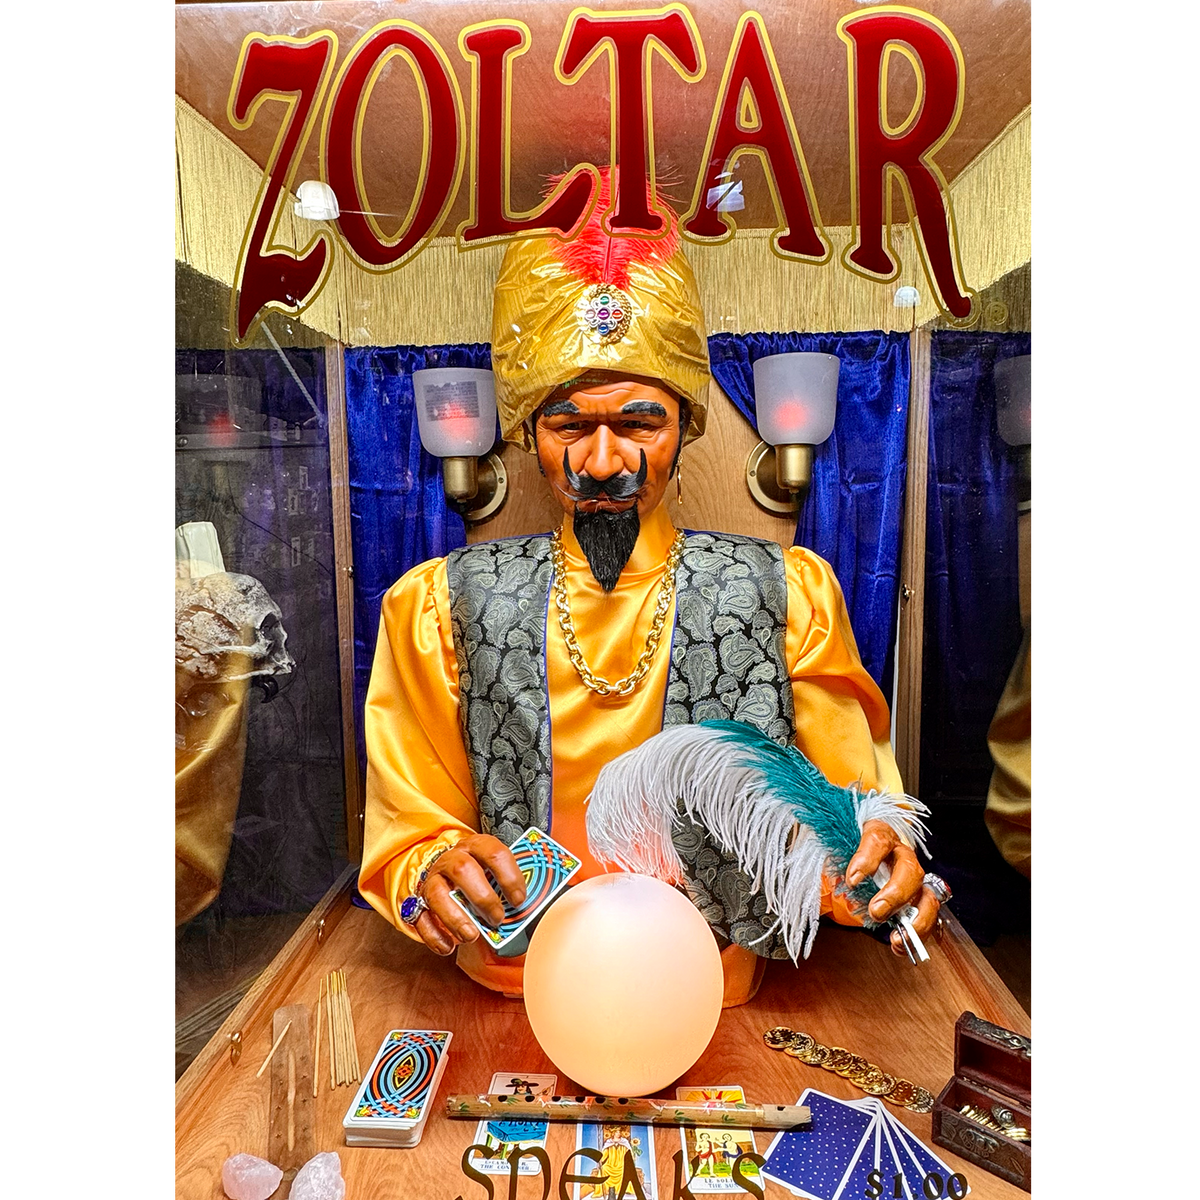 Zoltar Fortune Teller Animated Prop